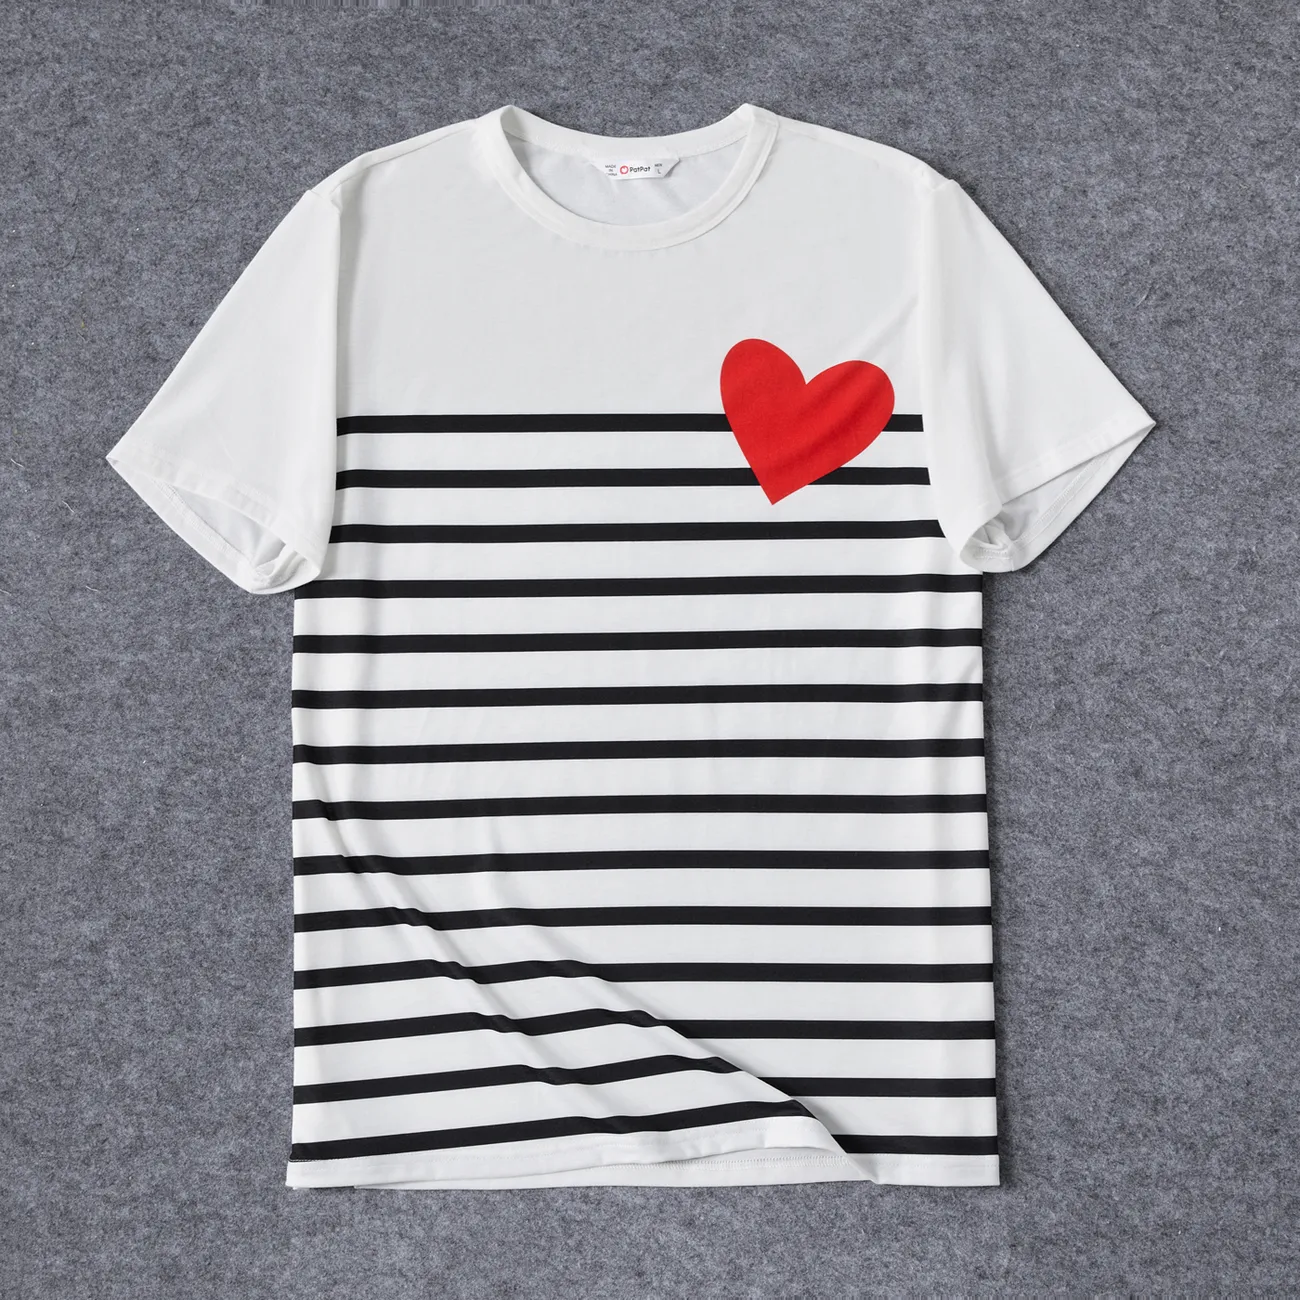 Family Matching Sets Allover Heart & Letter Print Twist Knot Body-con Dresses or Short-sleeve Striped T-shirts  White big image 1